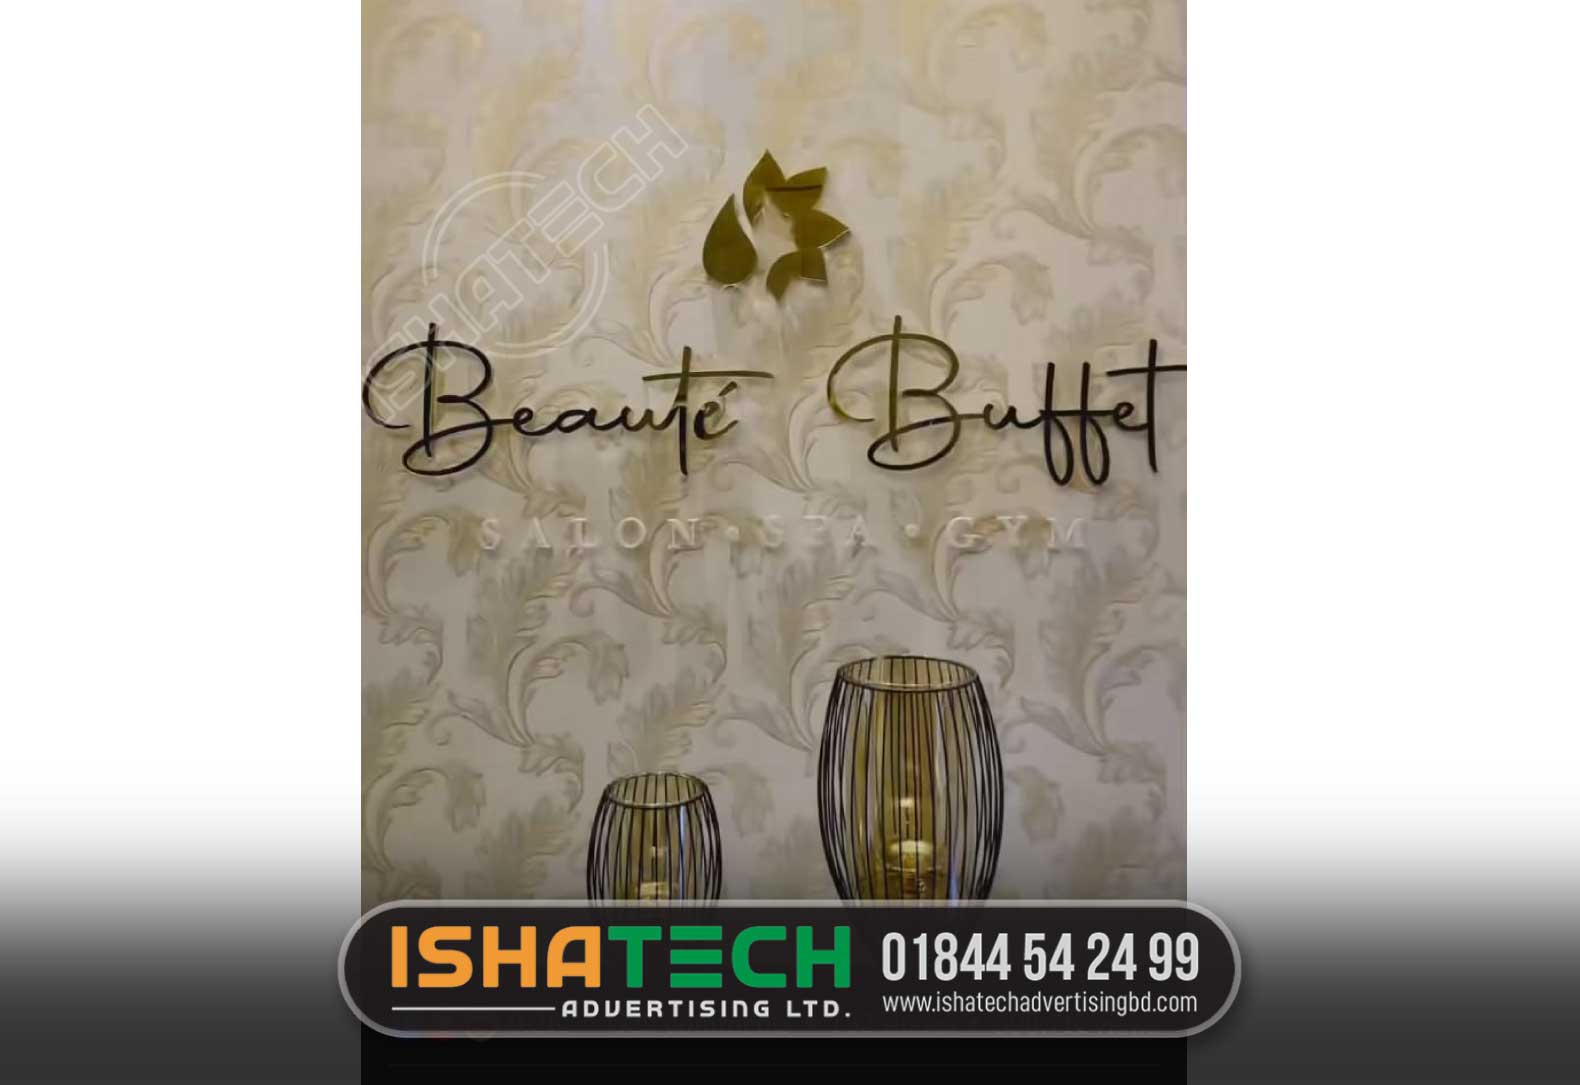 BEAUTE BEFFET OFFICE NAMEPLATE, SIGNAGE COMPANY BD, Signage company bd price list. Signage company bd price. led sign board bd. led sign board price in bangladesh. glorious sign. digital sign board price in bangladesh. led digital sign board. signage bd.